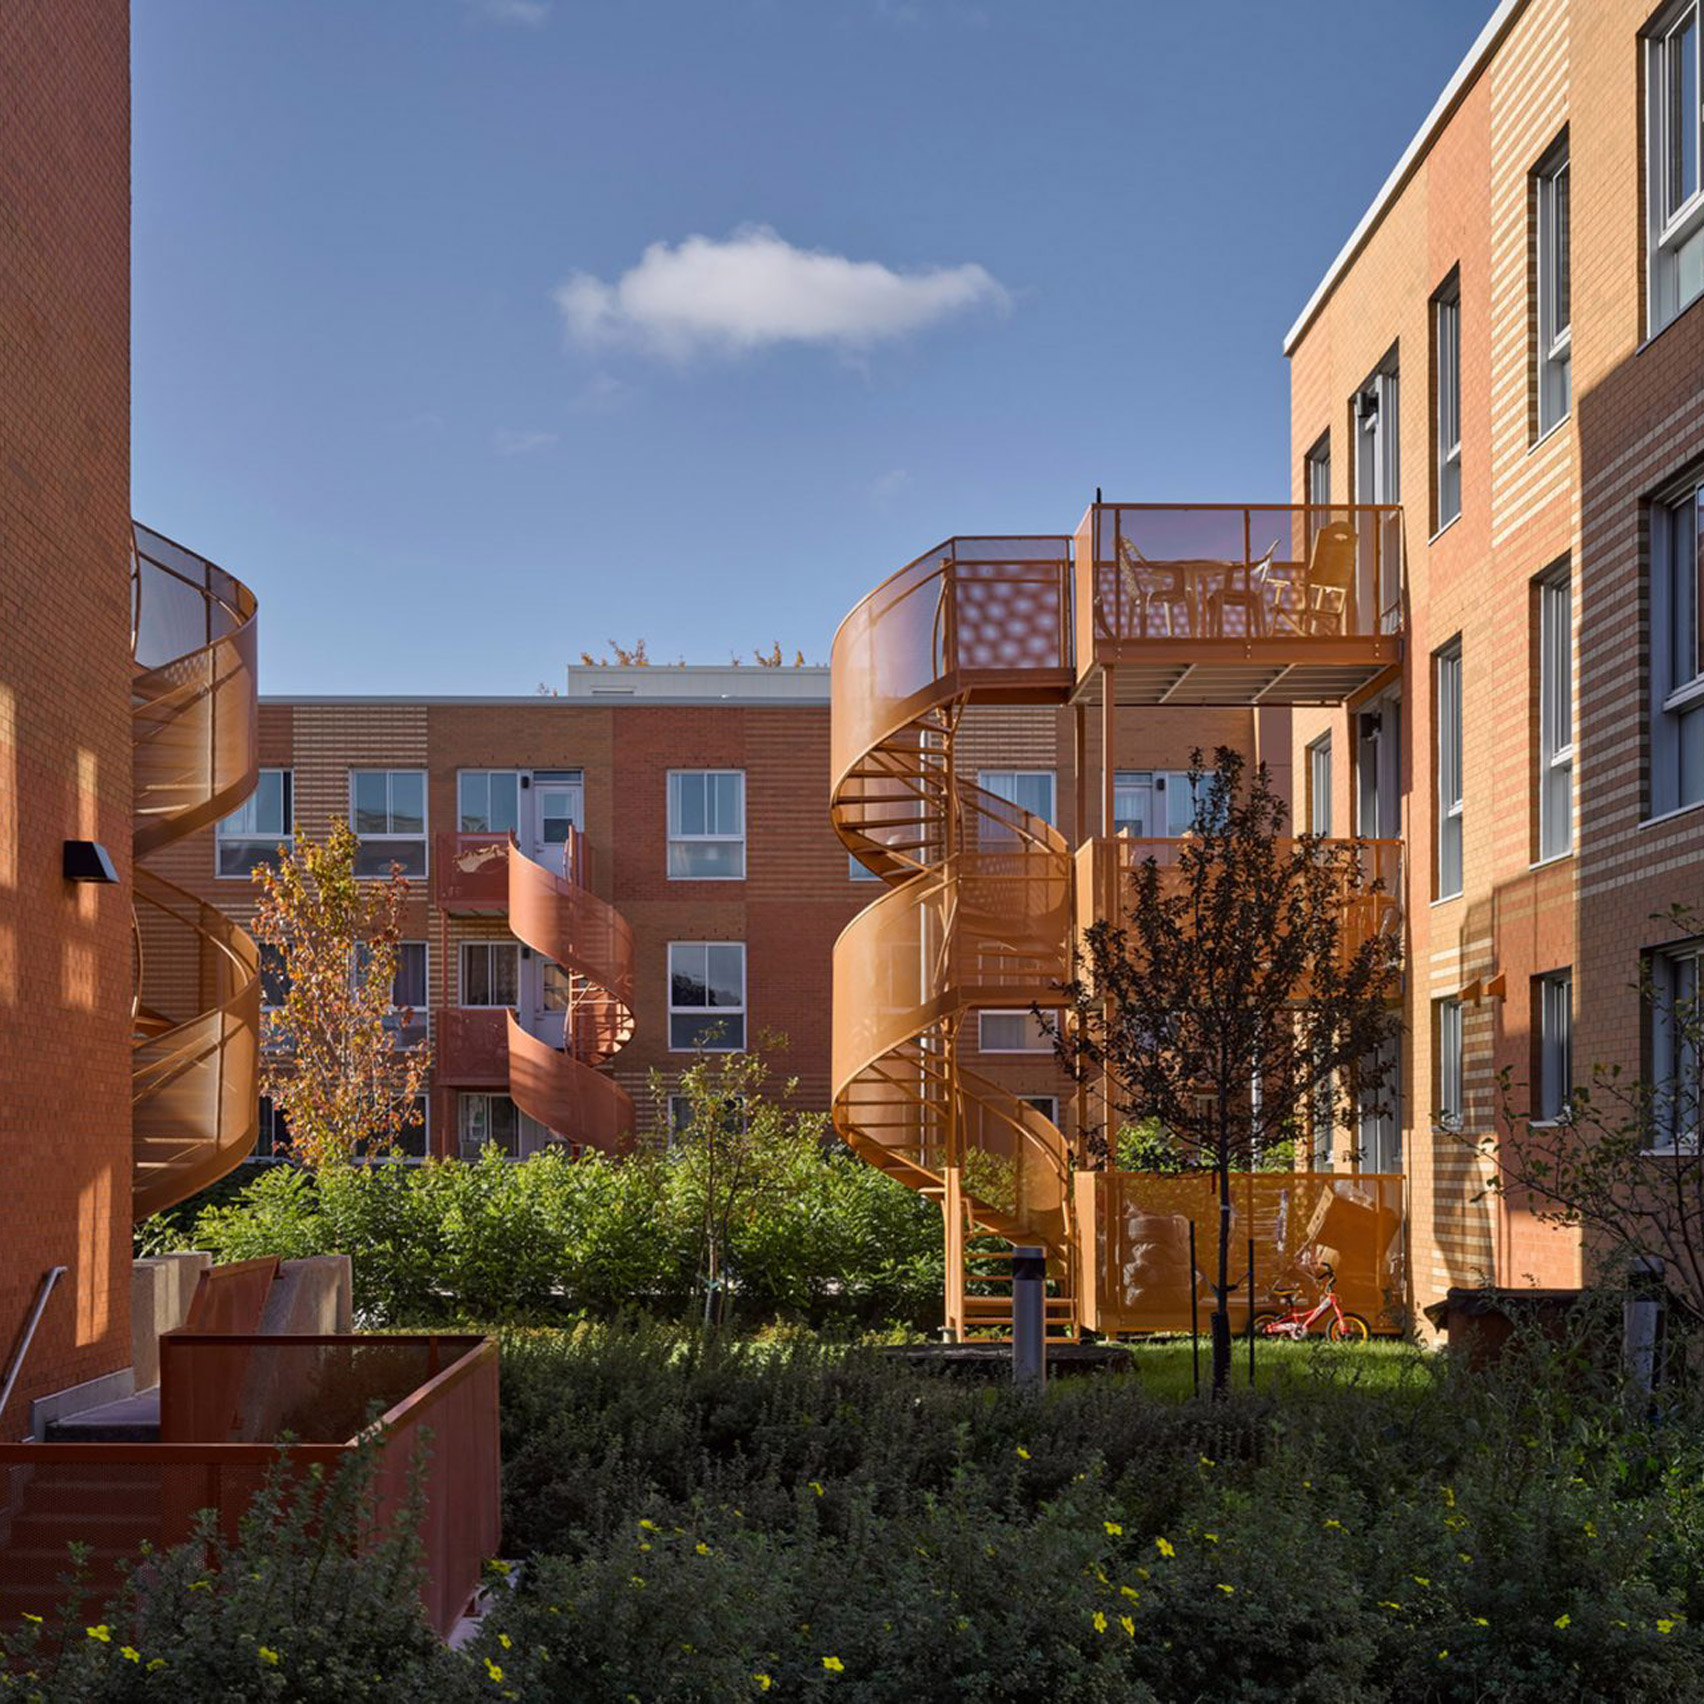 External staircases at Les Habitations in Montreal